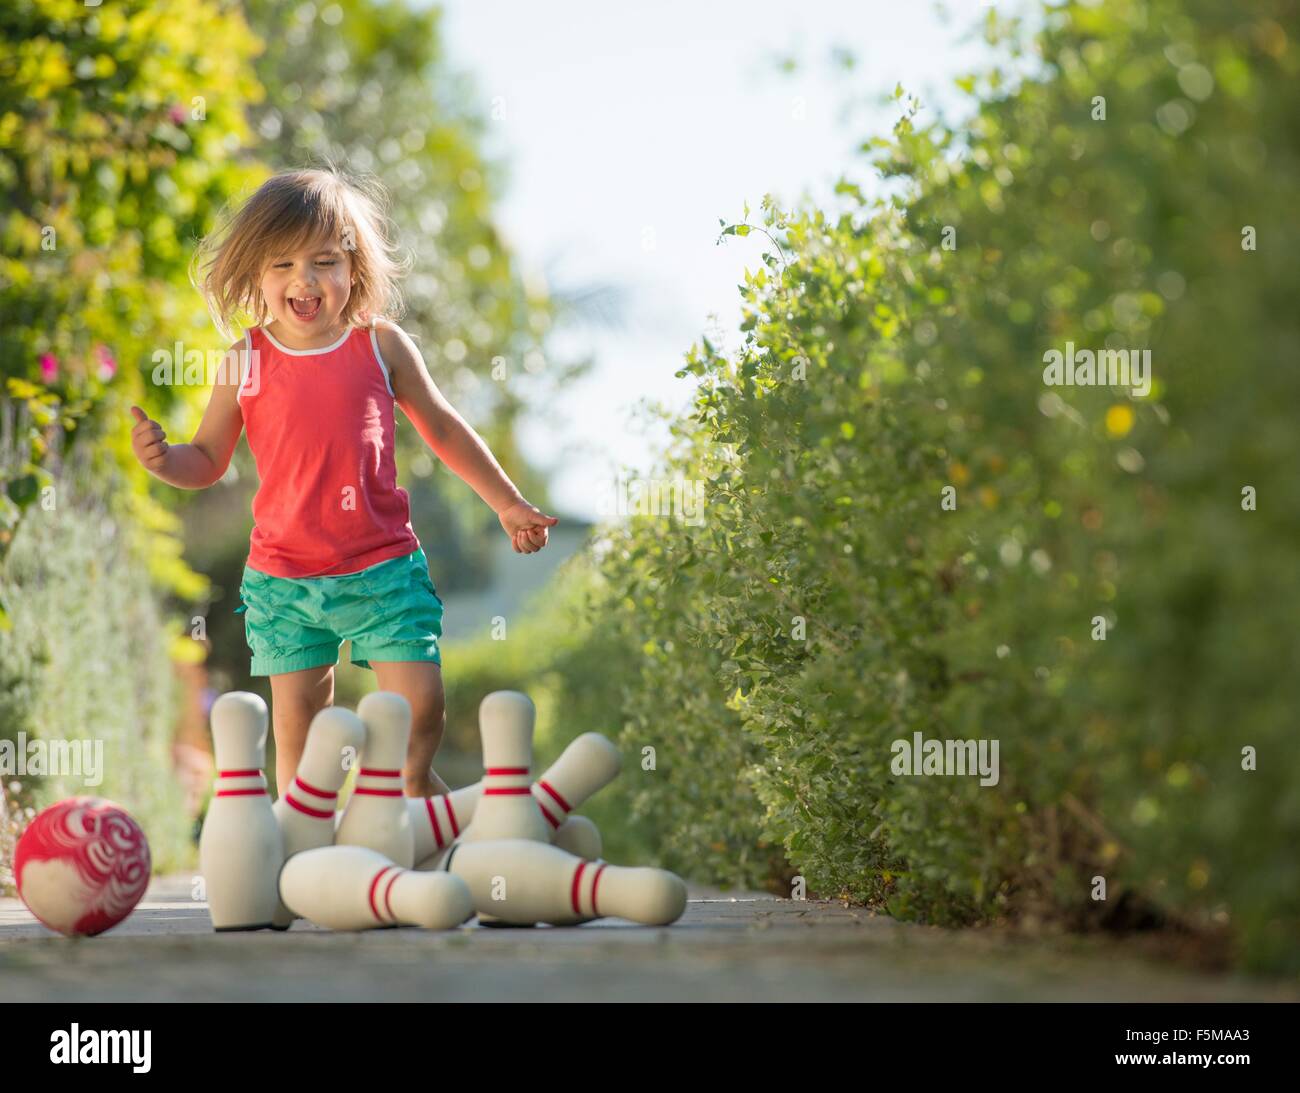 Young girl playing with skittles, outdoors Stock Photo